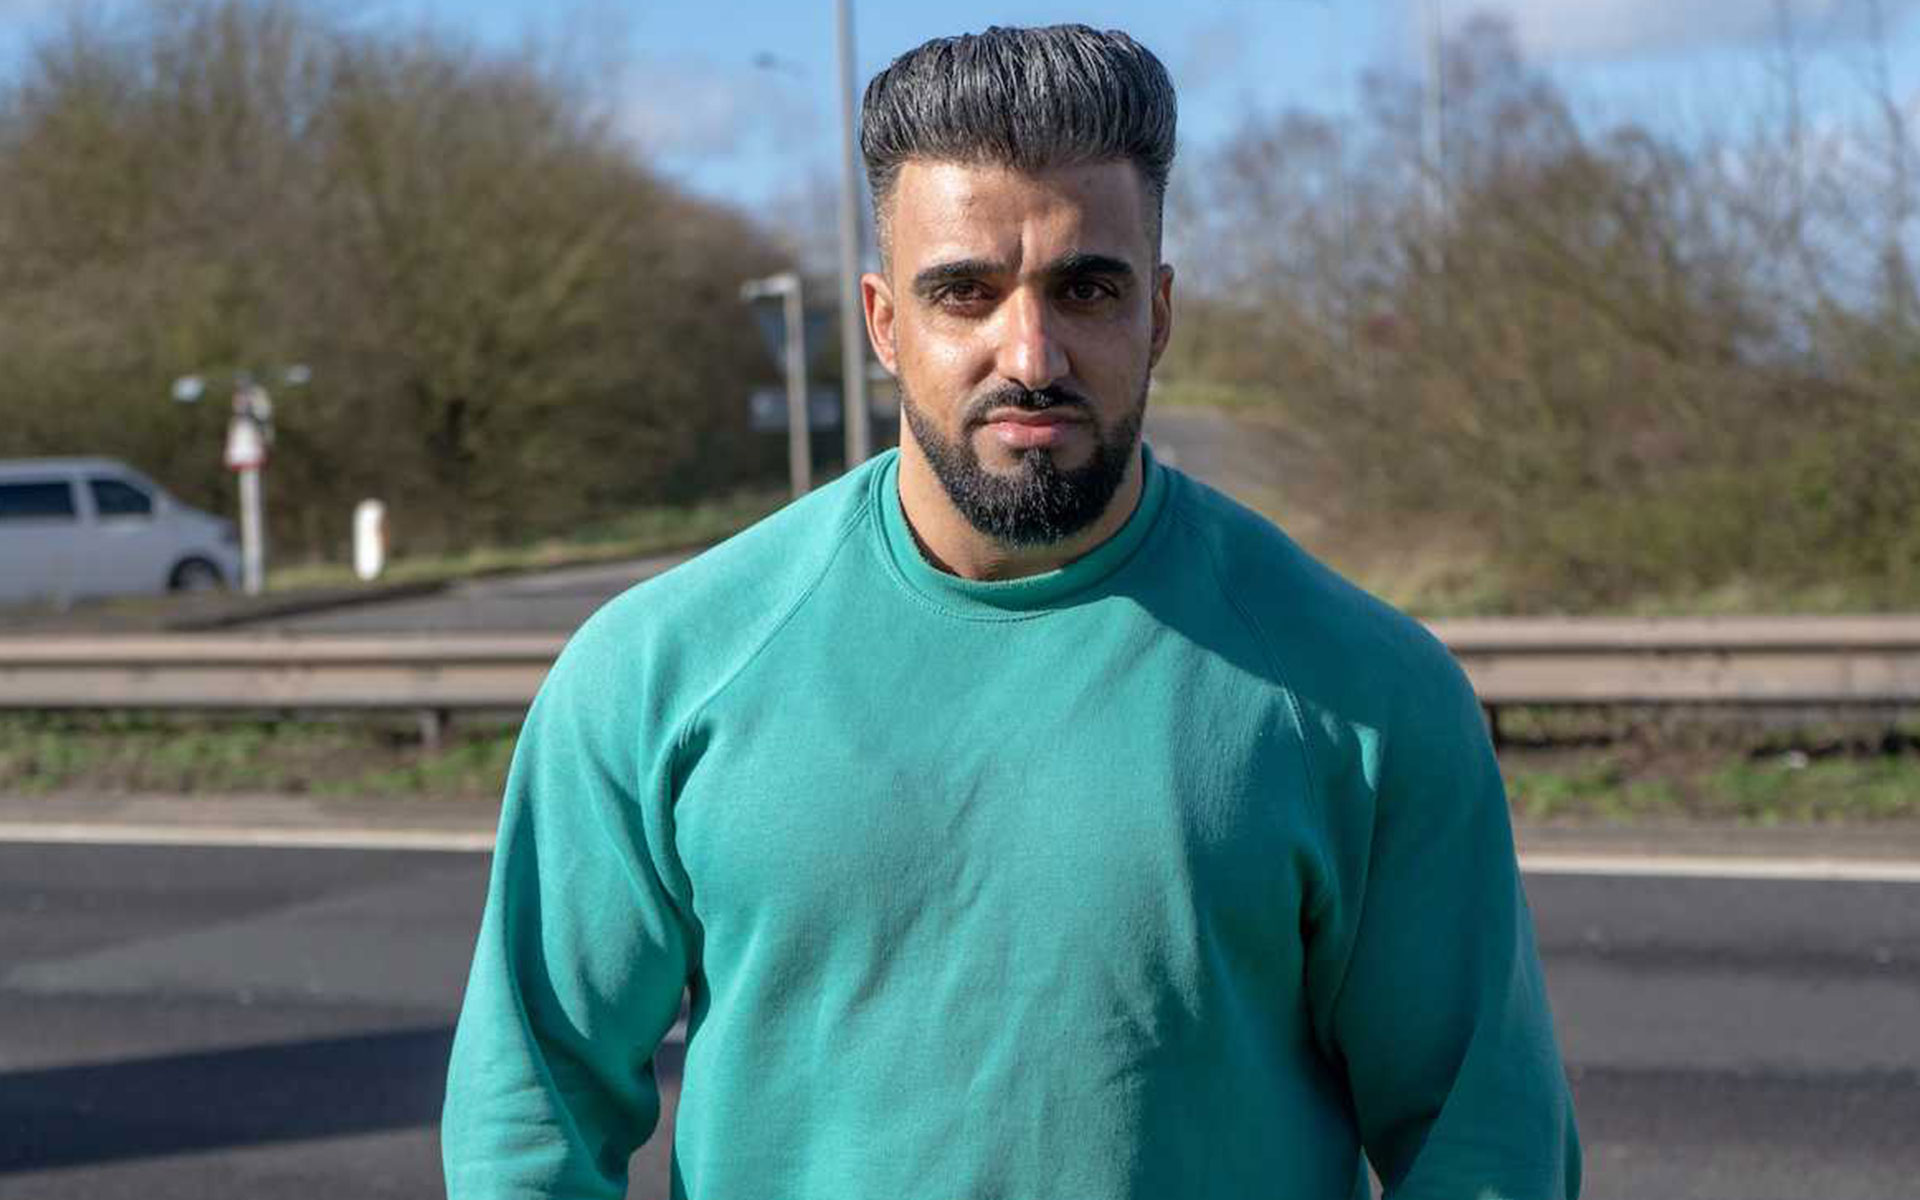 Motorist ran across a dual carriageway to rescue six people from a burning camper van before it exploded. Gym owner Akam had stopped at a petrol station on the A38 in Fradley when he heard a loud bang. He ran to investigate and saw a camper van on its side in the aftermath of a crash on the slip-road. The father-of-one dodged through oncoming traffic and ran across the dual carriageway. As he approached the vehicle, Akam was irritated to see people standing around with their phones out, filming as it started to catch fire. Akam broke open the back doors of the camper but luggage and equipment was blocking the way. Instead, he jumped onto the side of the vehicle, and started pulling the six occupants out through a window. He managed to get the sixth person out safely moments before a gas canister on board exploded. Akam said: “The reason I didn’t give up was because many years ago I lost a cousin when his car got burned and I just thought that if someone had been there like I had, he could have been saved.” Chief superintendent Jeff Moore praised Akam for risking his own life to save others. He said: “Your involvement prevented the matter being much worse and ensured those involved suffered only minor injuries.”